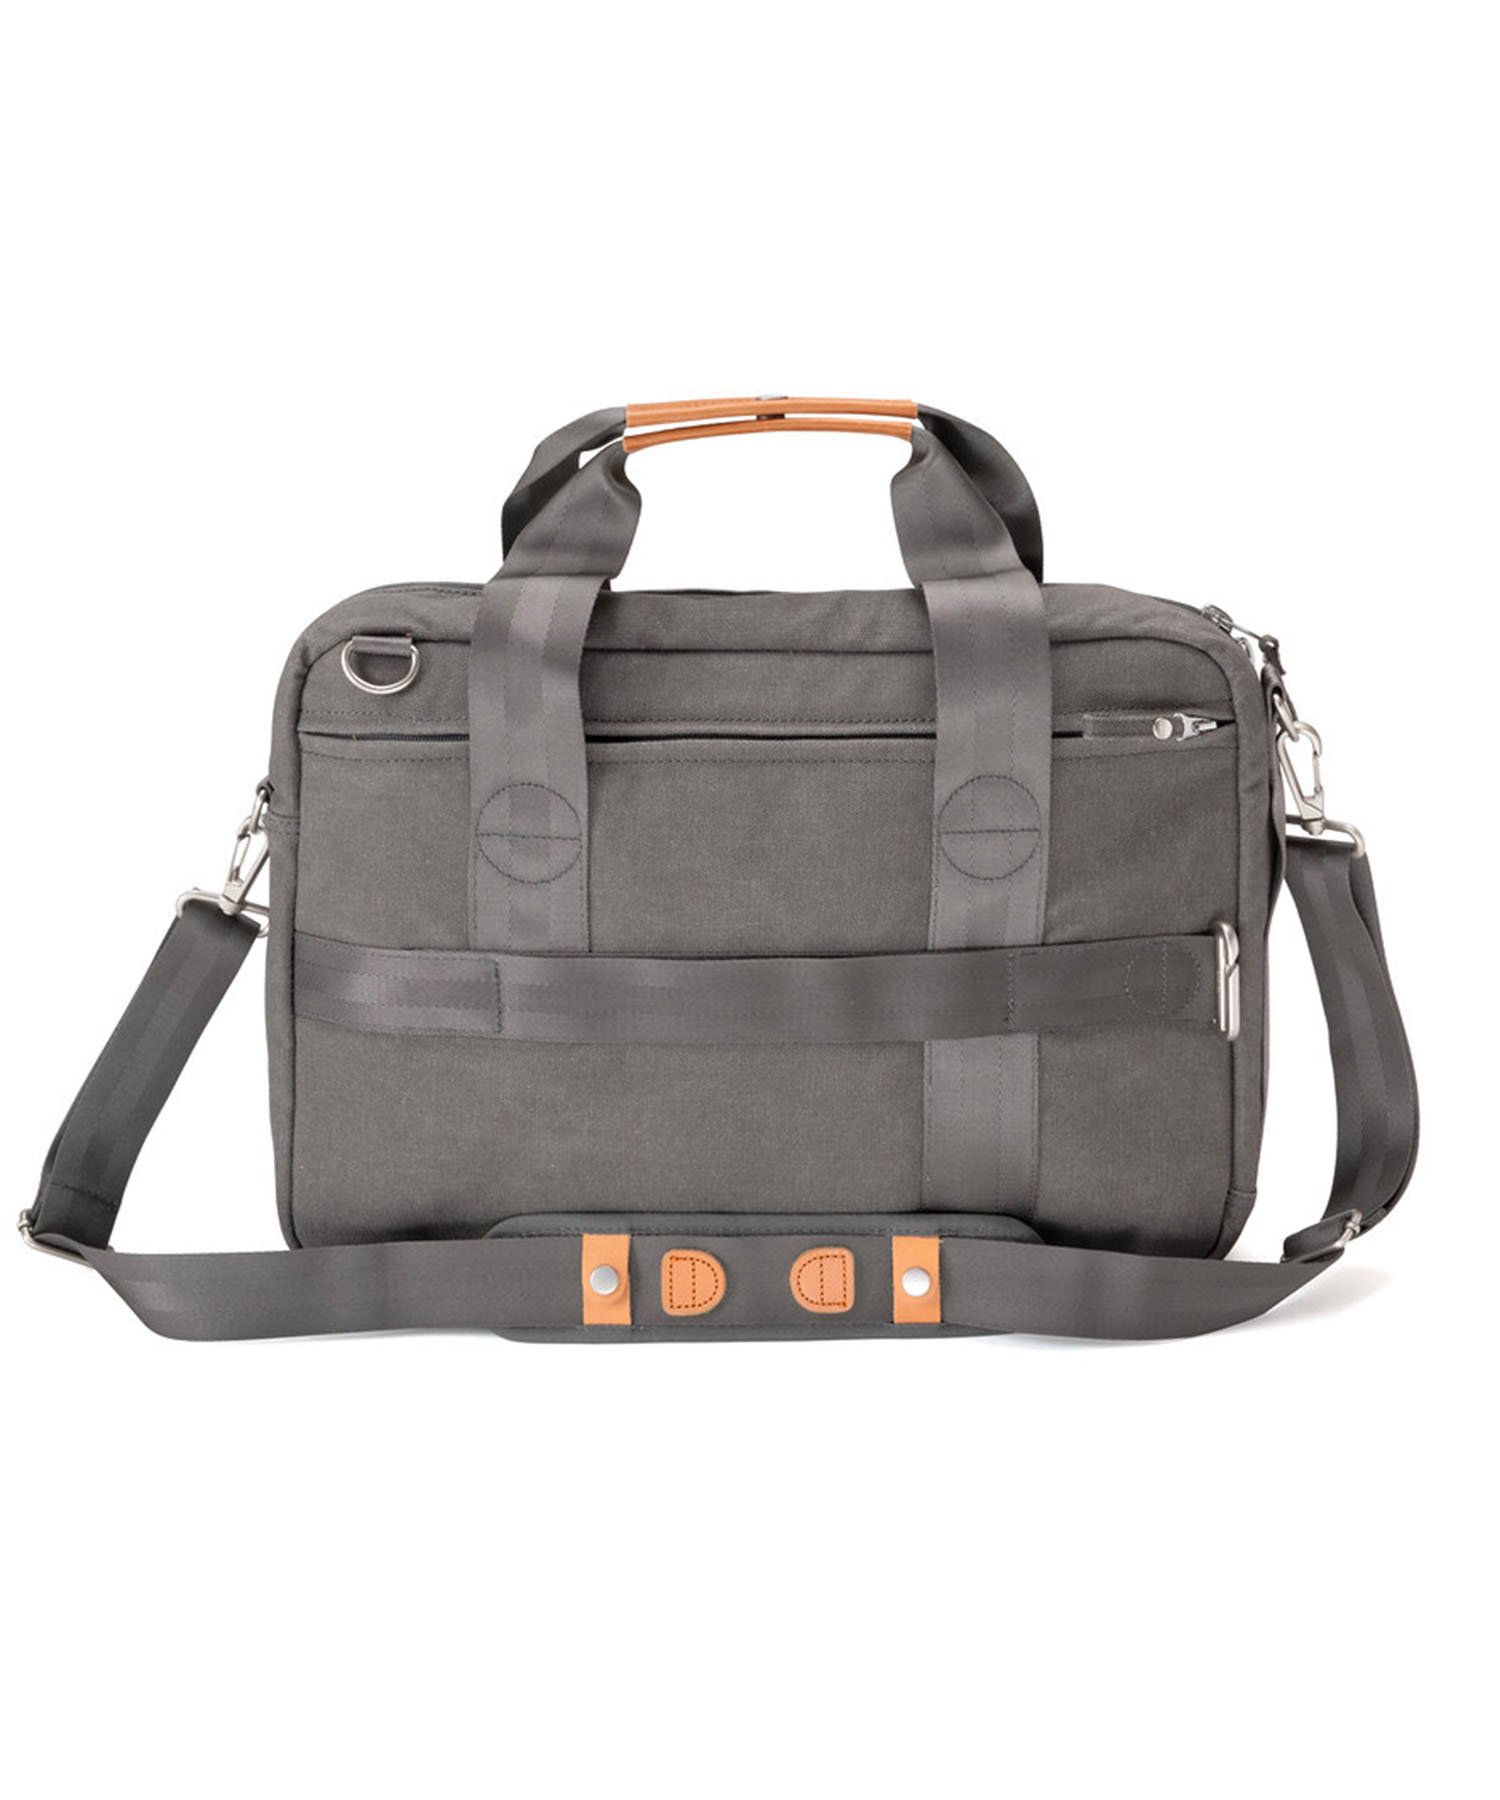 <img class='new_mark_img1' src='https://img.shop-pro.jp/img/new/icons15.gif' style='border:none;display:inline;margin:0px;padding:0px;width:auto;' />【QWSTION】Office Bag Organic Washed Grey